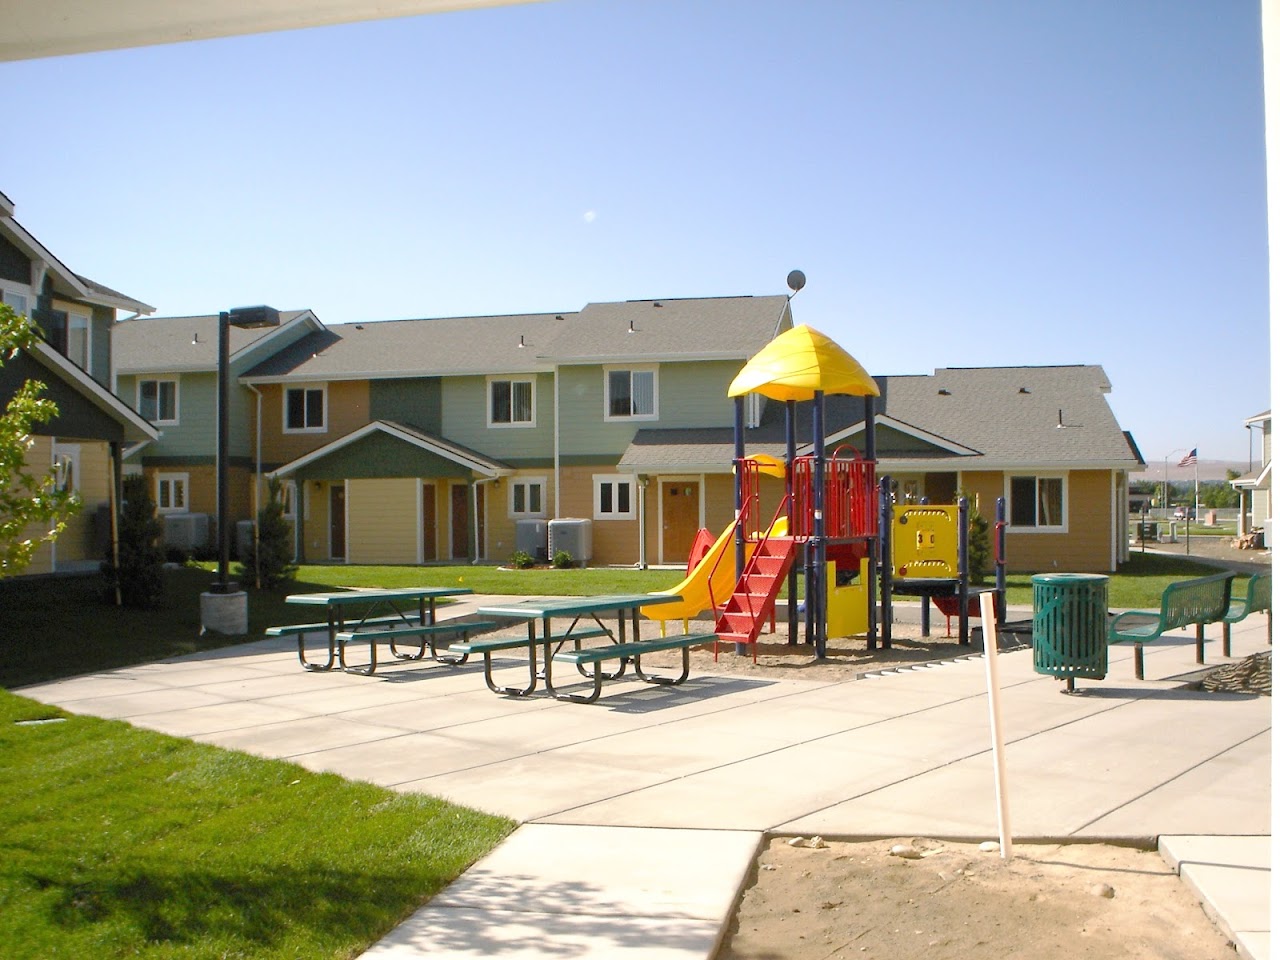 Photo of TEPEYAC HAVEN. Affordable housing located at 801 N 22ND AVE PASCO, WA 99301